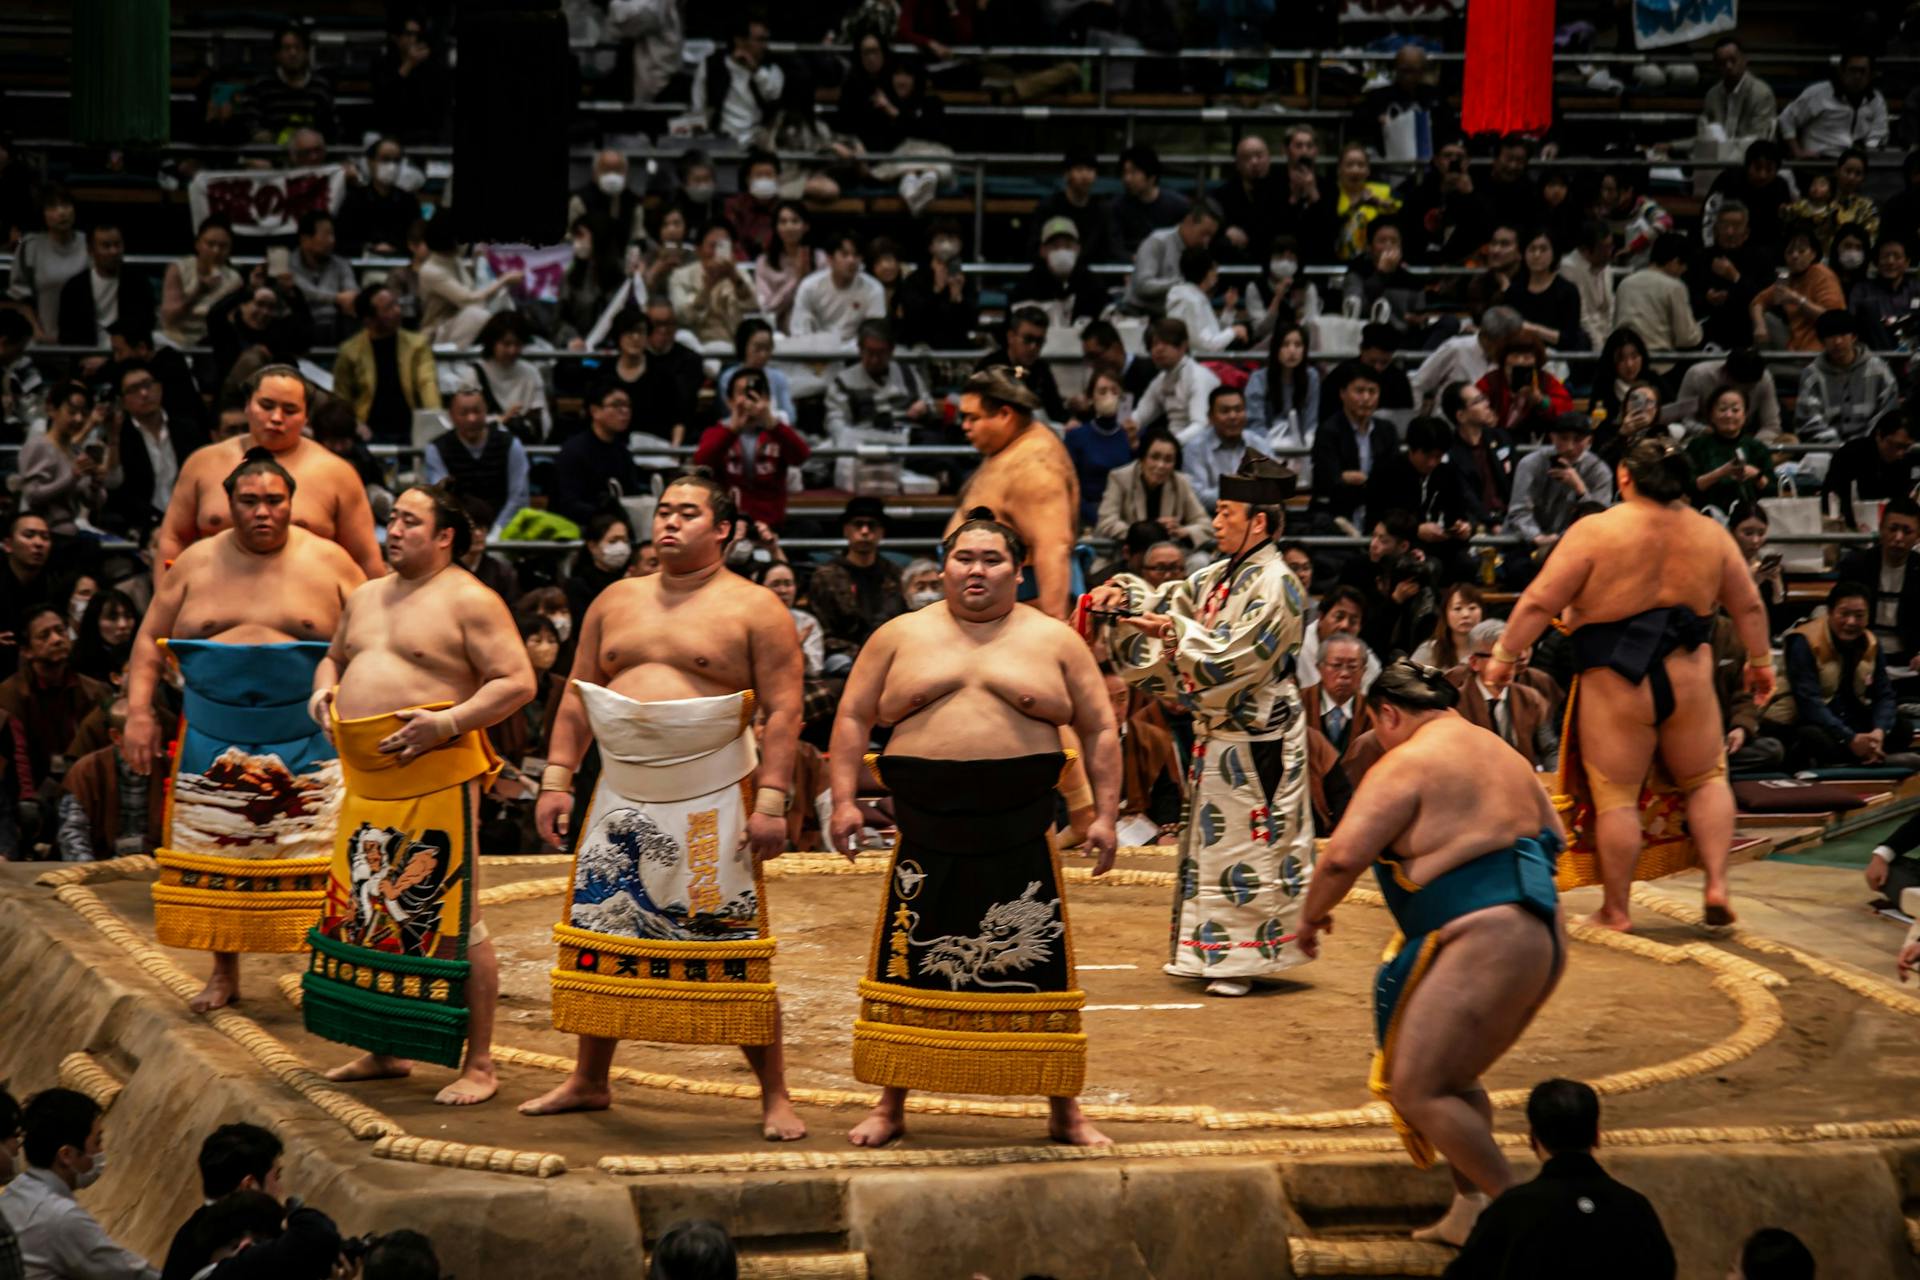 The Makunouchi, the highest division, gather in the dohyo (wrestling ring). Photo source: James Saunders-Wyndham